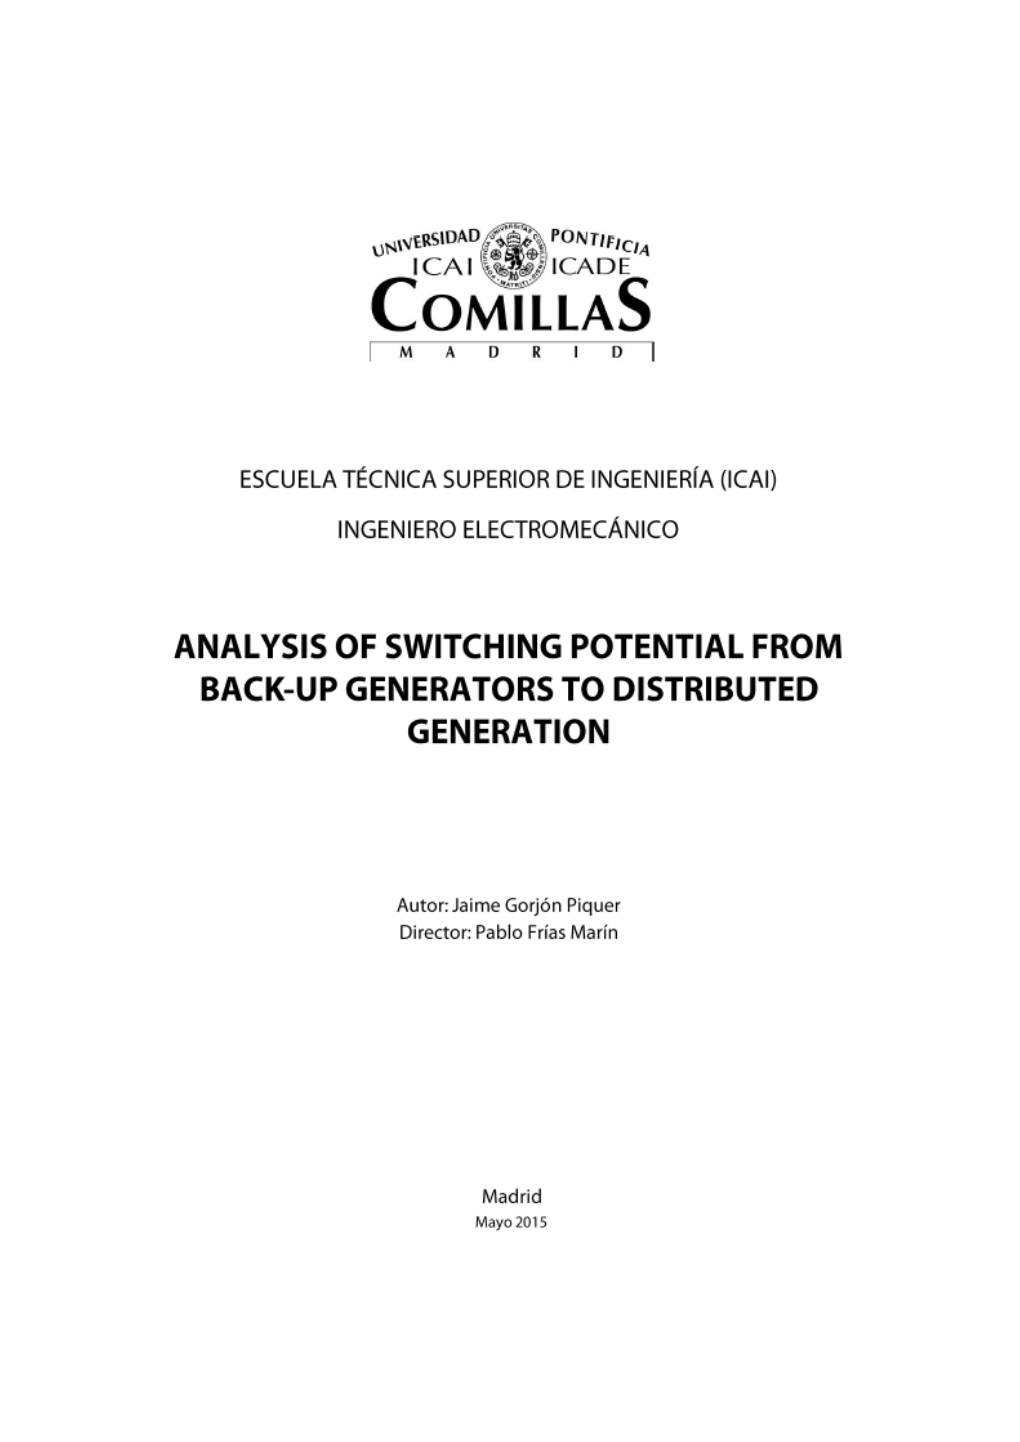 Analysis of Switching Potential from Back-Up Generators to Distributed